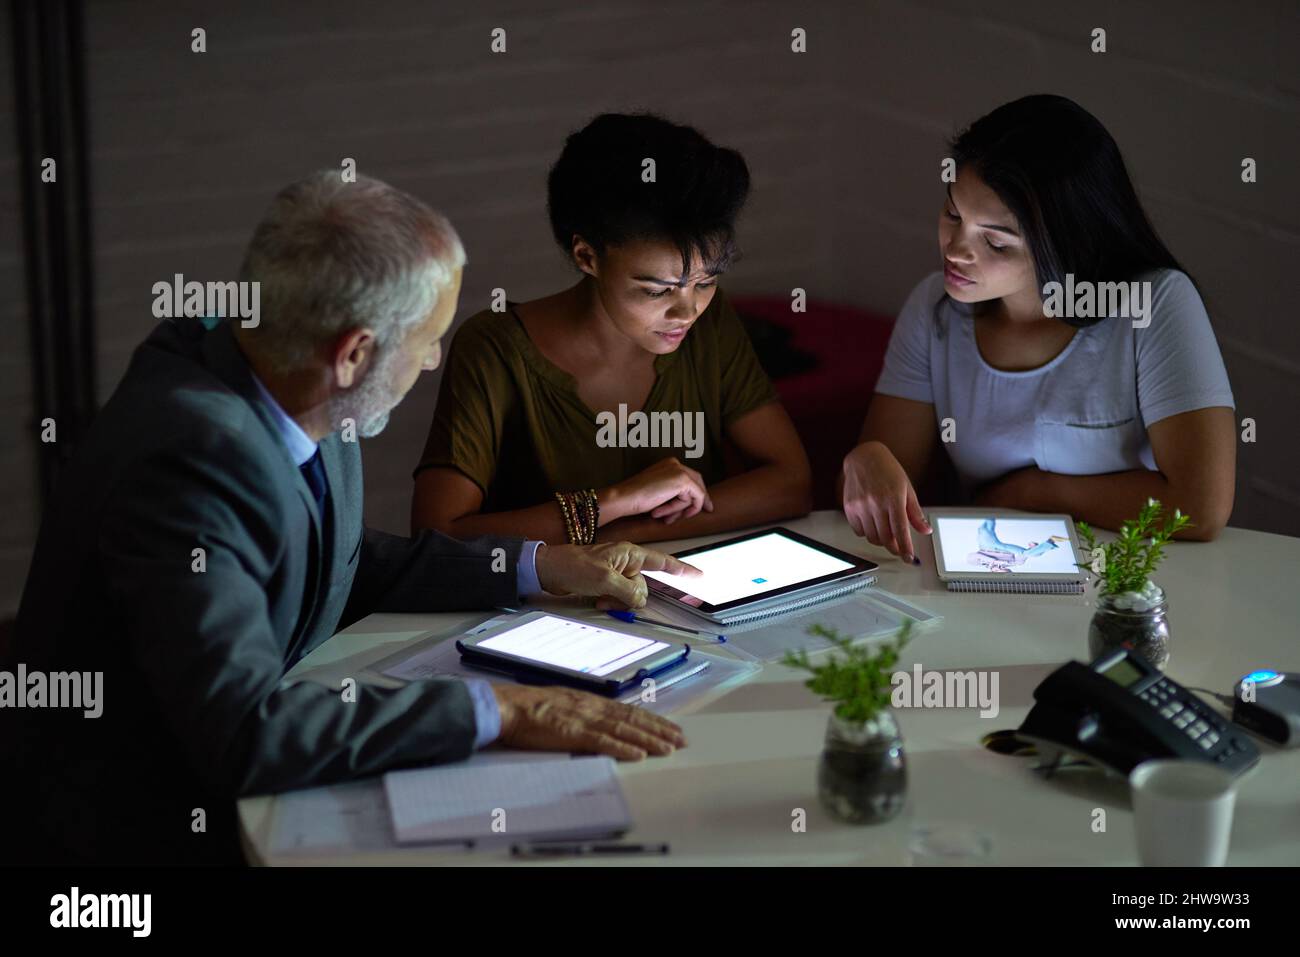 Combining their technical knowhow. Shot of a group colleagues using digital tablets while working late in an office. Stock Photo